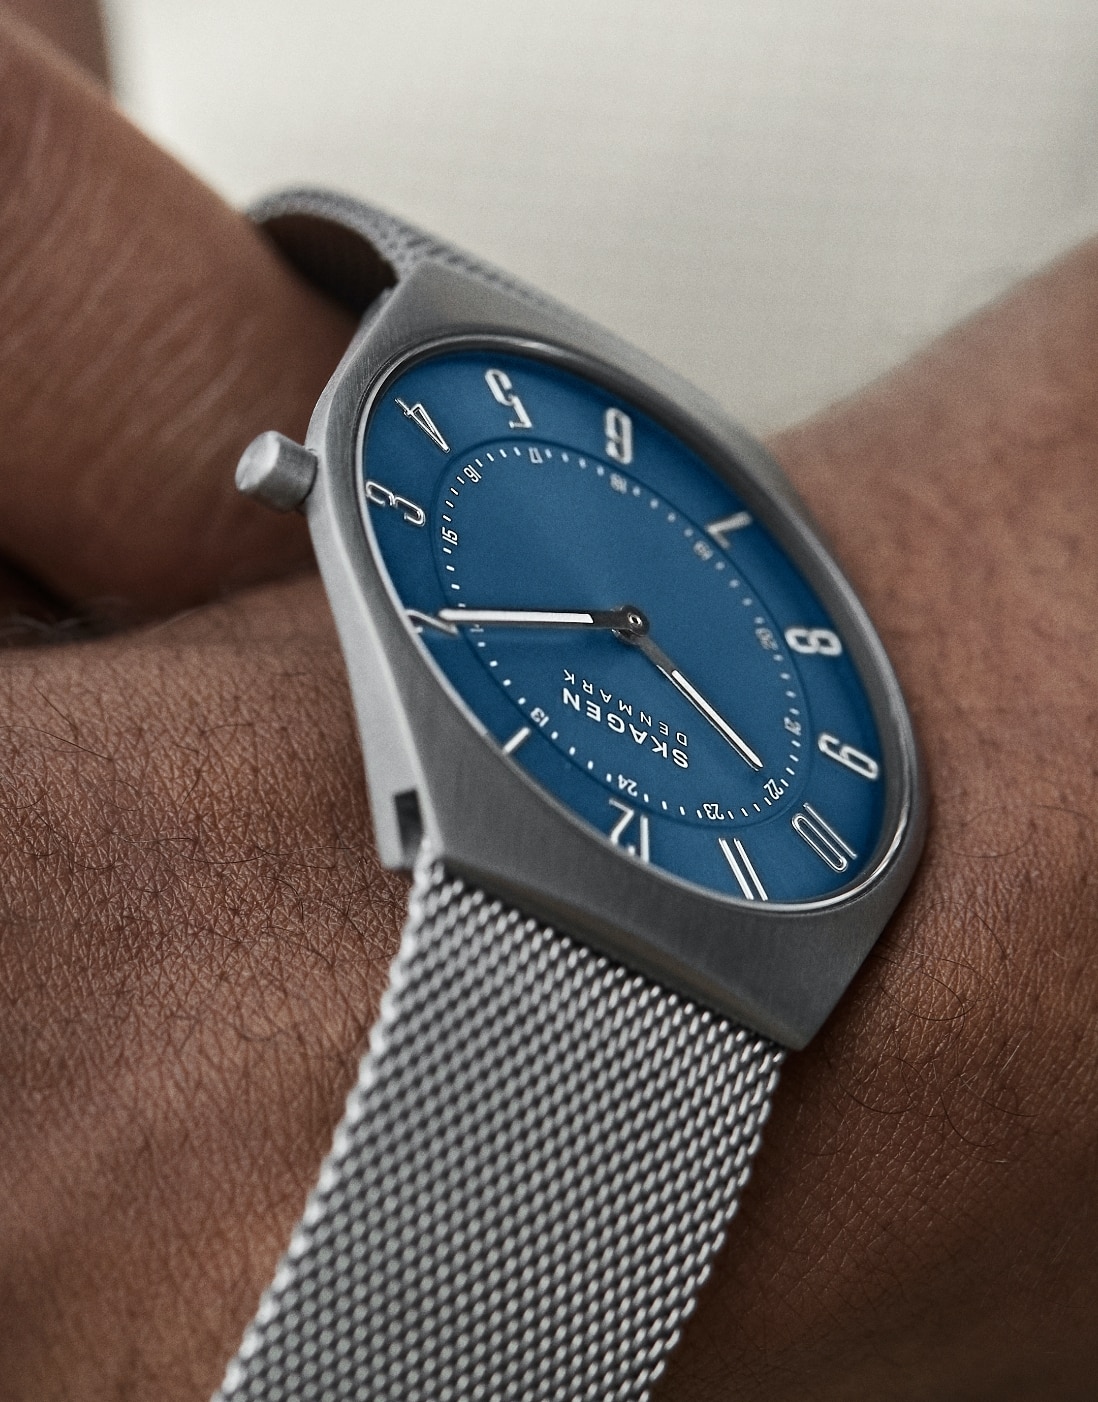 Image of a Grenen watch.